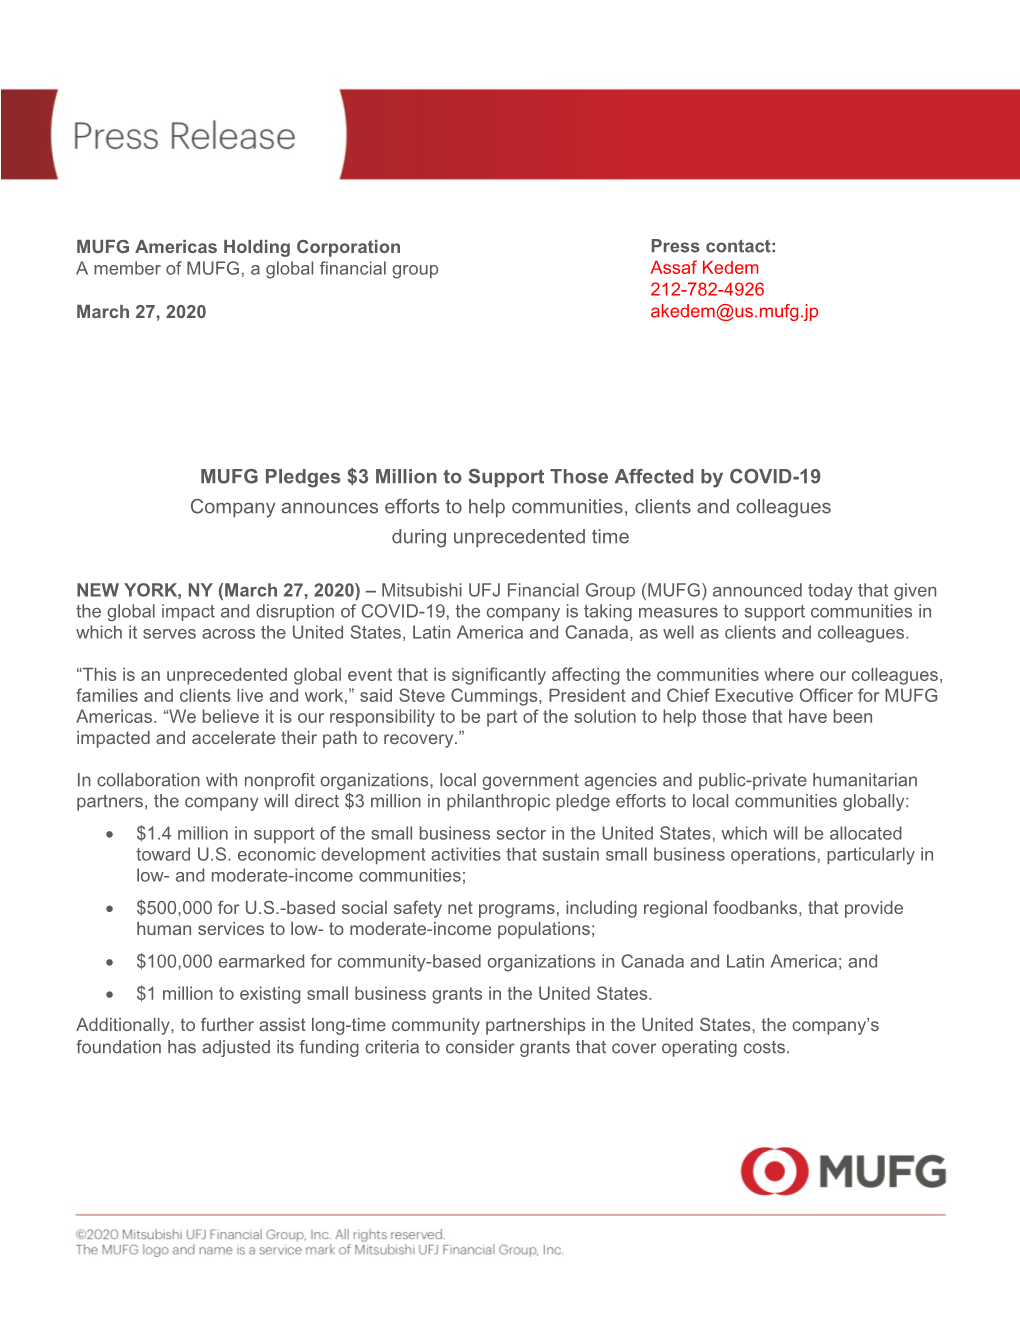 MUFG Pledges $3 Million to Support Those Affected by COVID-19 Company Announces Efforts to Help Communities, Clients and Colleagues During Unprecedented Time